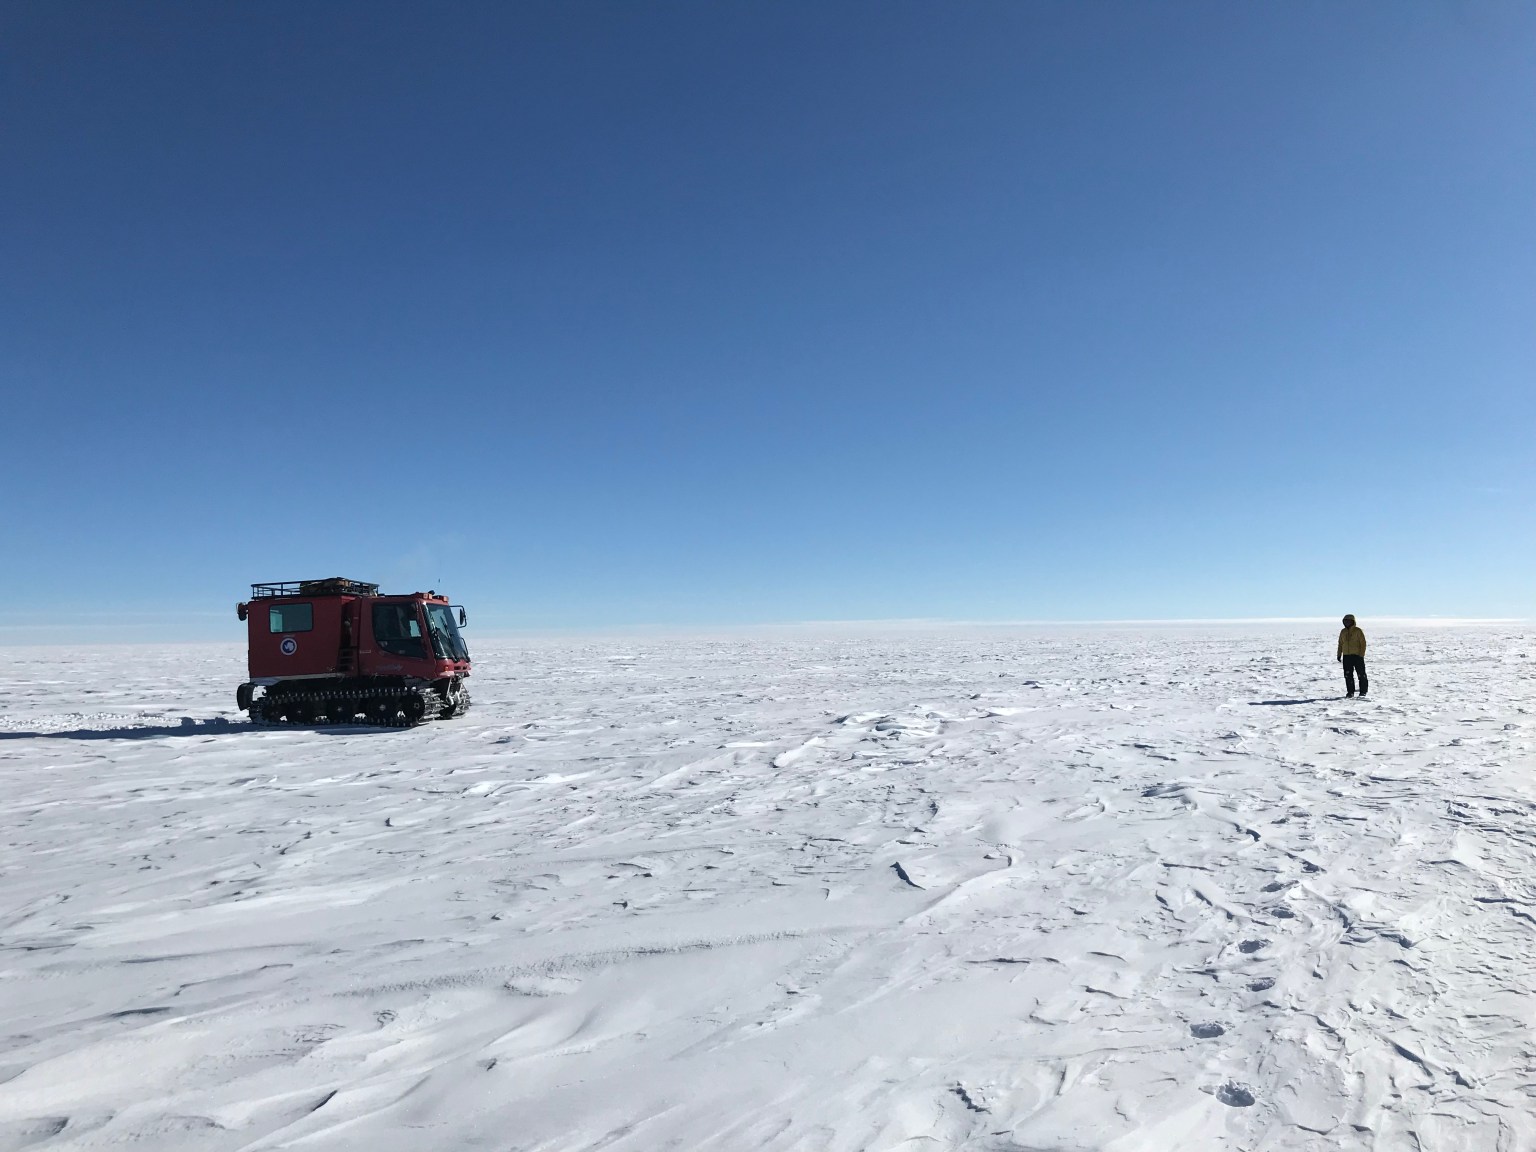 A scientist in winter clothes stands on a wide, flat, snow-covered plain with no trees or features, looking across at a boxy red snow vehicle with treads. The sky above them is cloudless and deep blue.